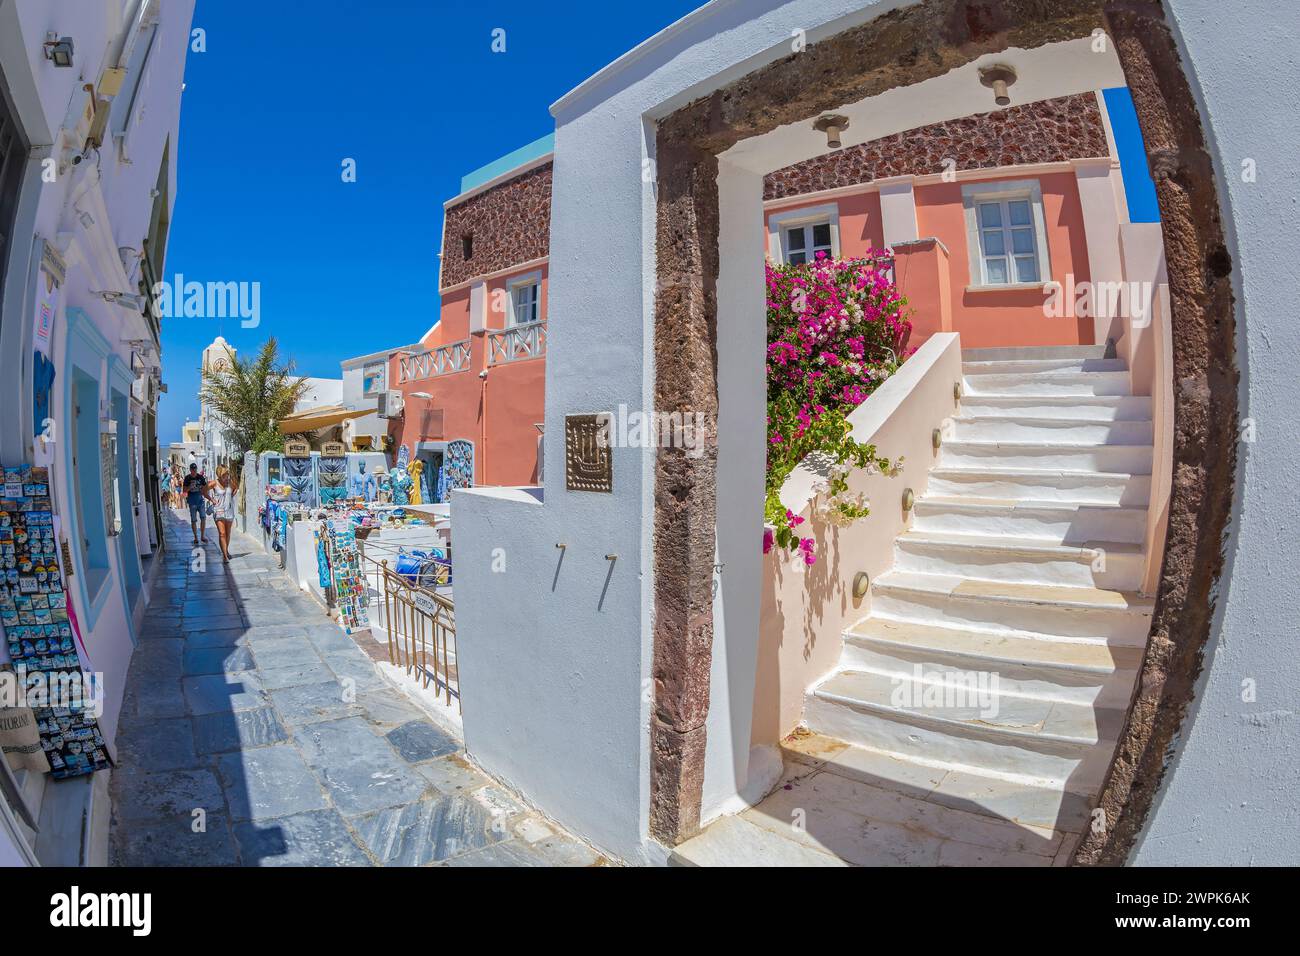 OIA, SANTORINI, GREECE - JUNE 21, 2021: Shop with typical souvenirs from Greece and Santorini island, located on Main Street Nik. Nomikou. Stock Photo